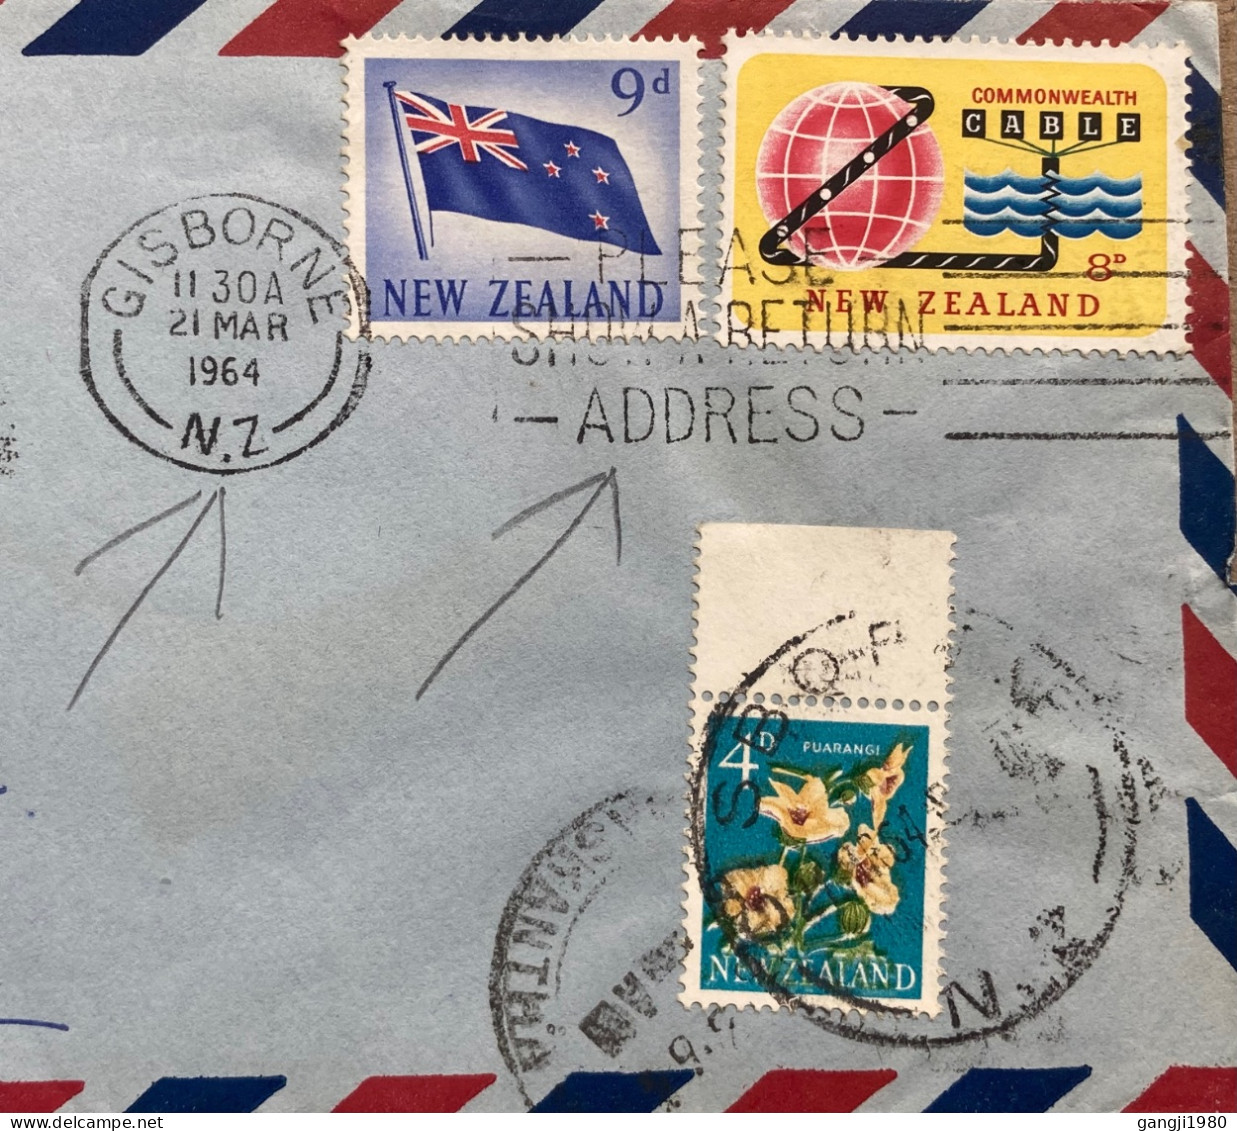 NEW-ZEALAND 1964, COVER USED TO INDIA, 3 DIFF STAMP, FLAG, CABLE, FLOWER, GISBORNE CITY SLOGAN, PLEASE SHOW RETURN ADDRE - Brieven En Documenten